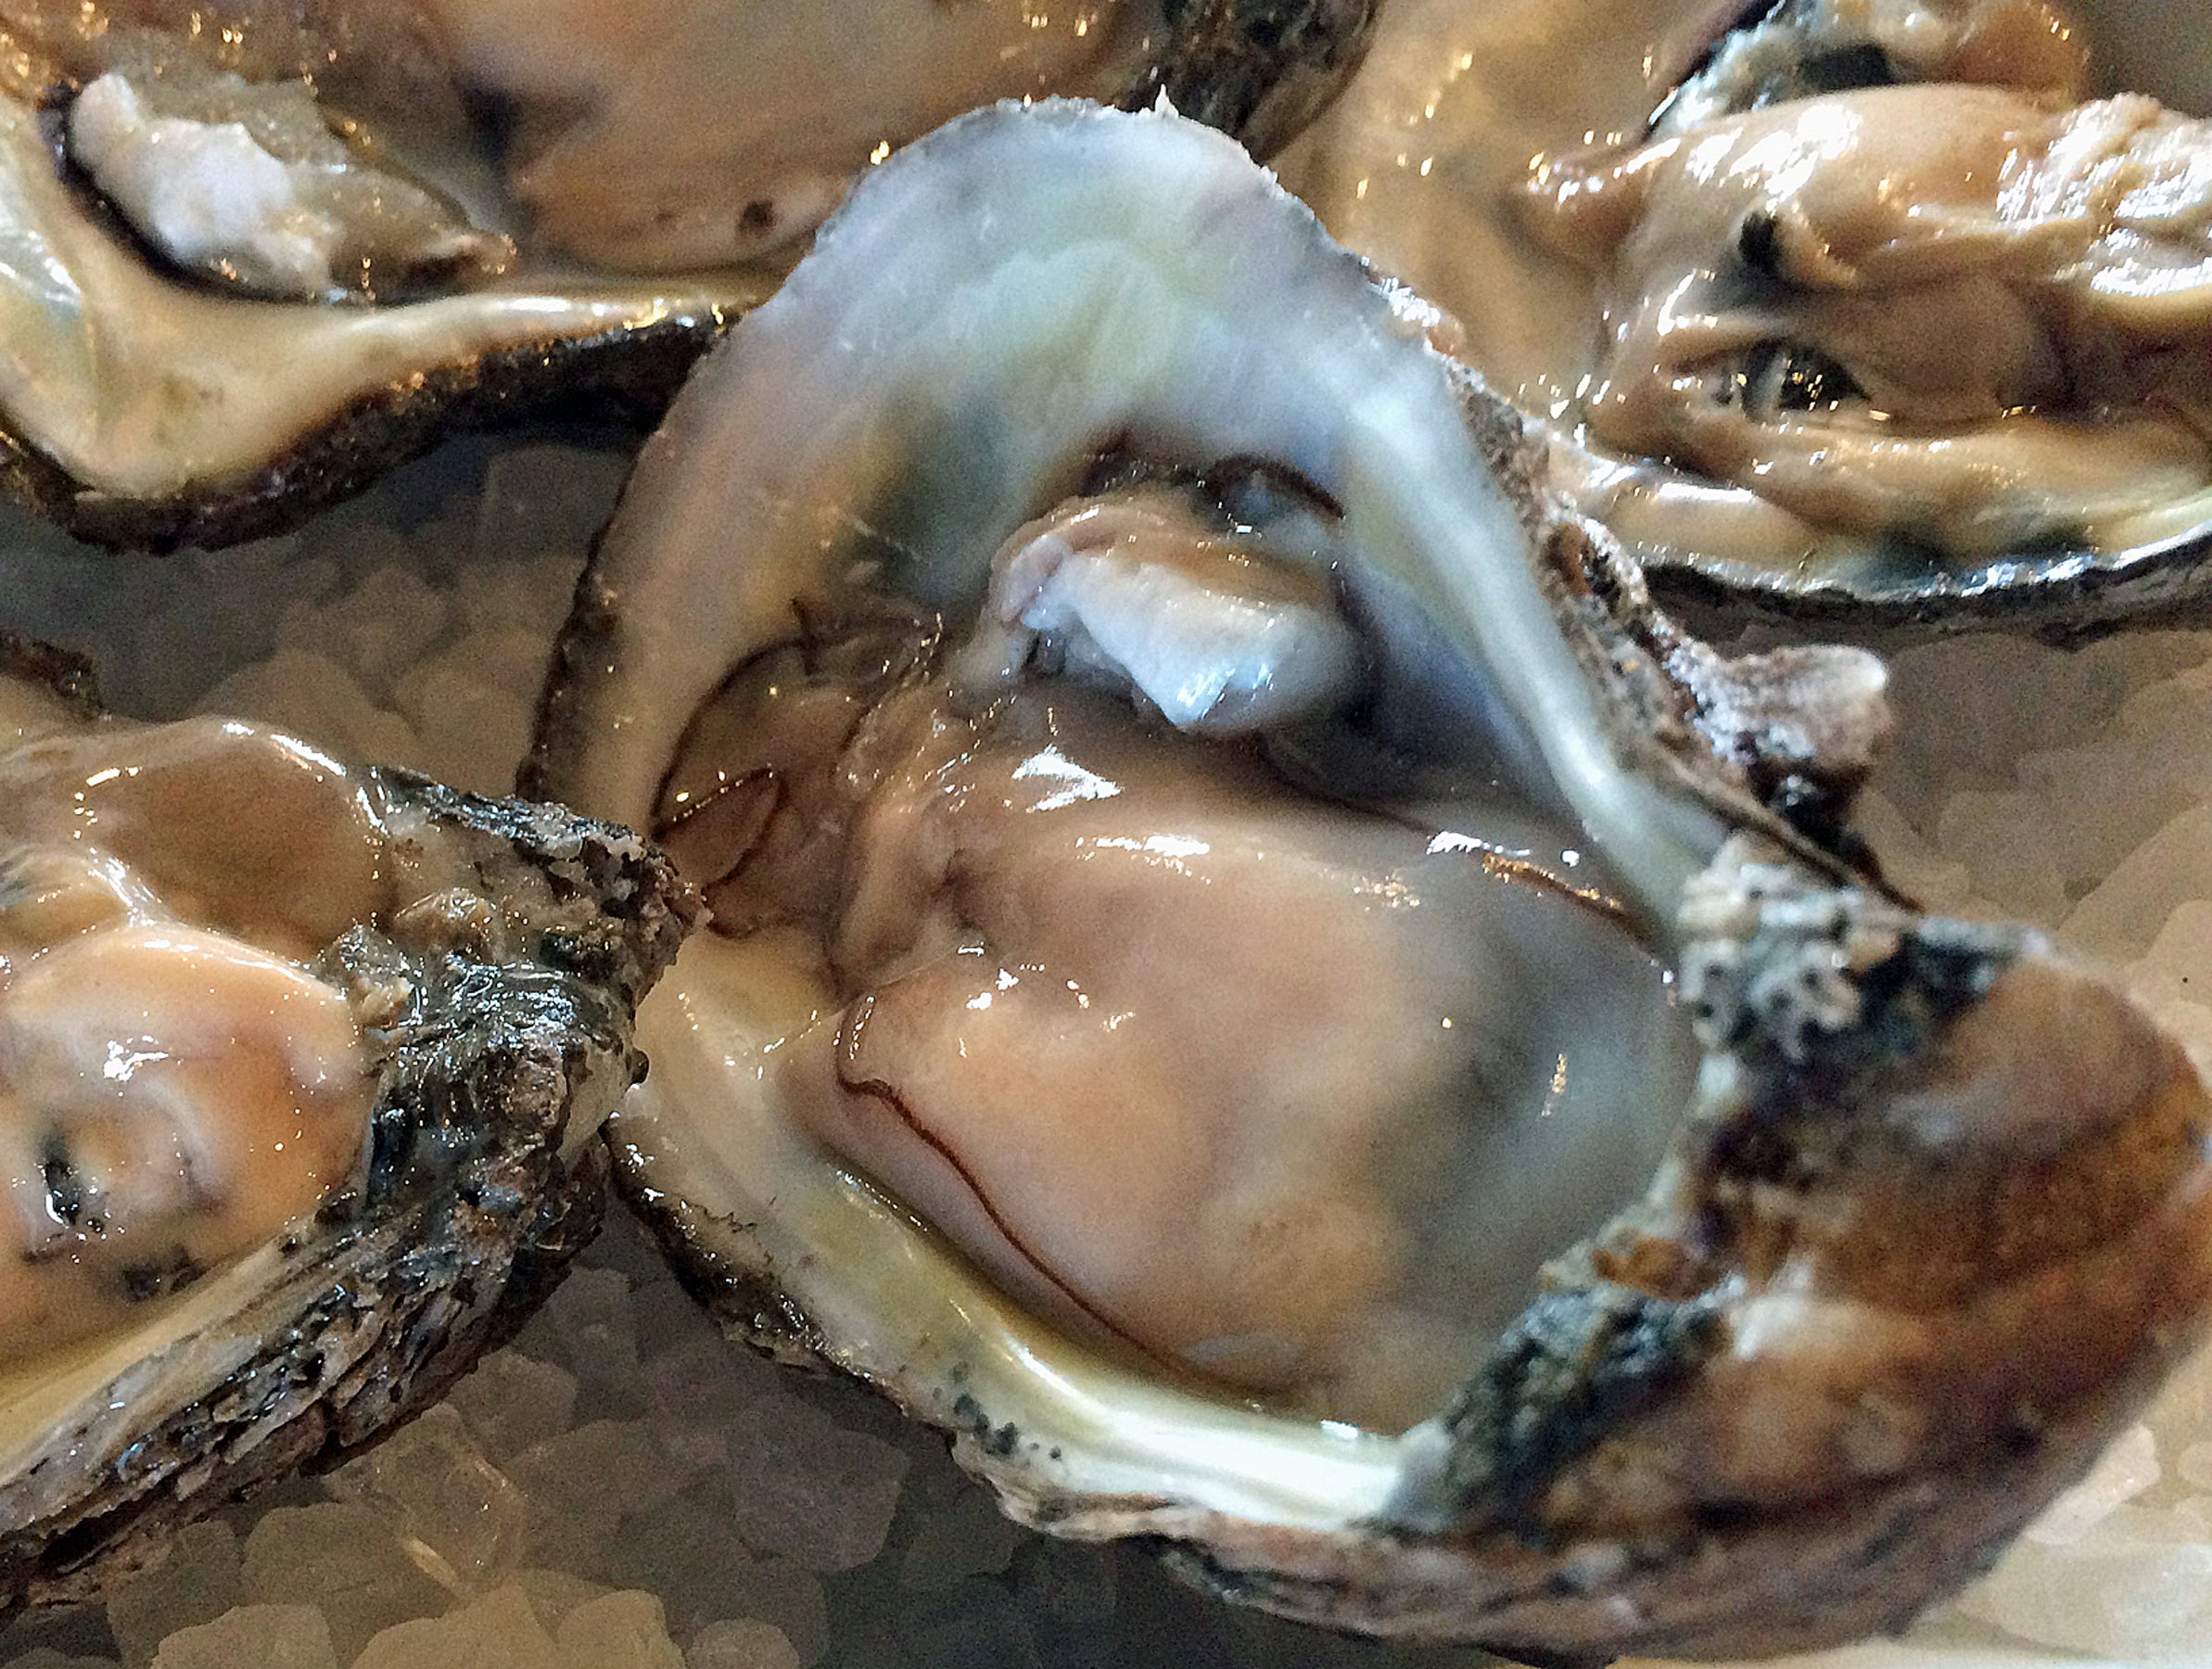 Oyster Management Area Update - Holiday Schedule